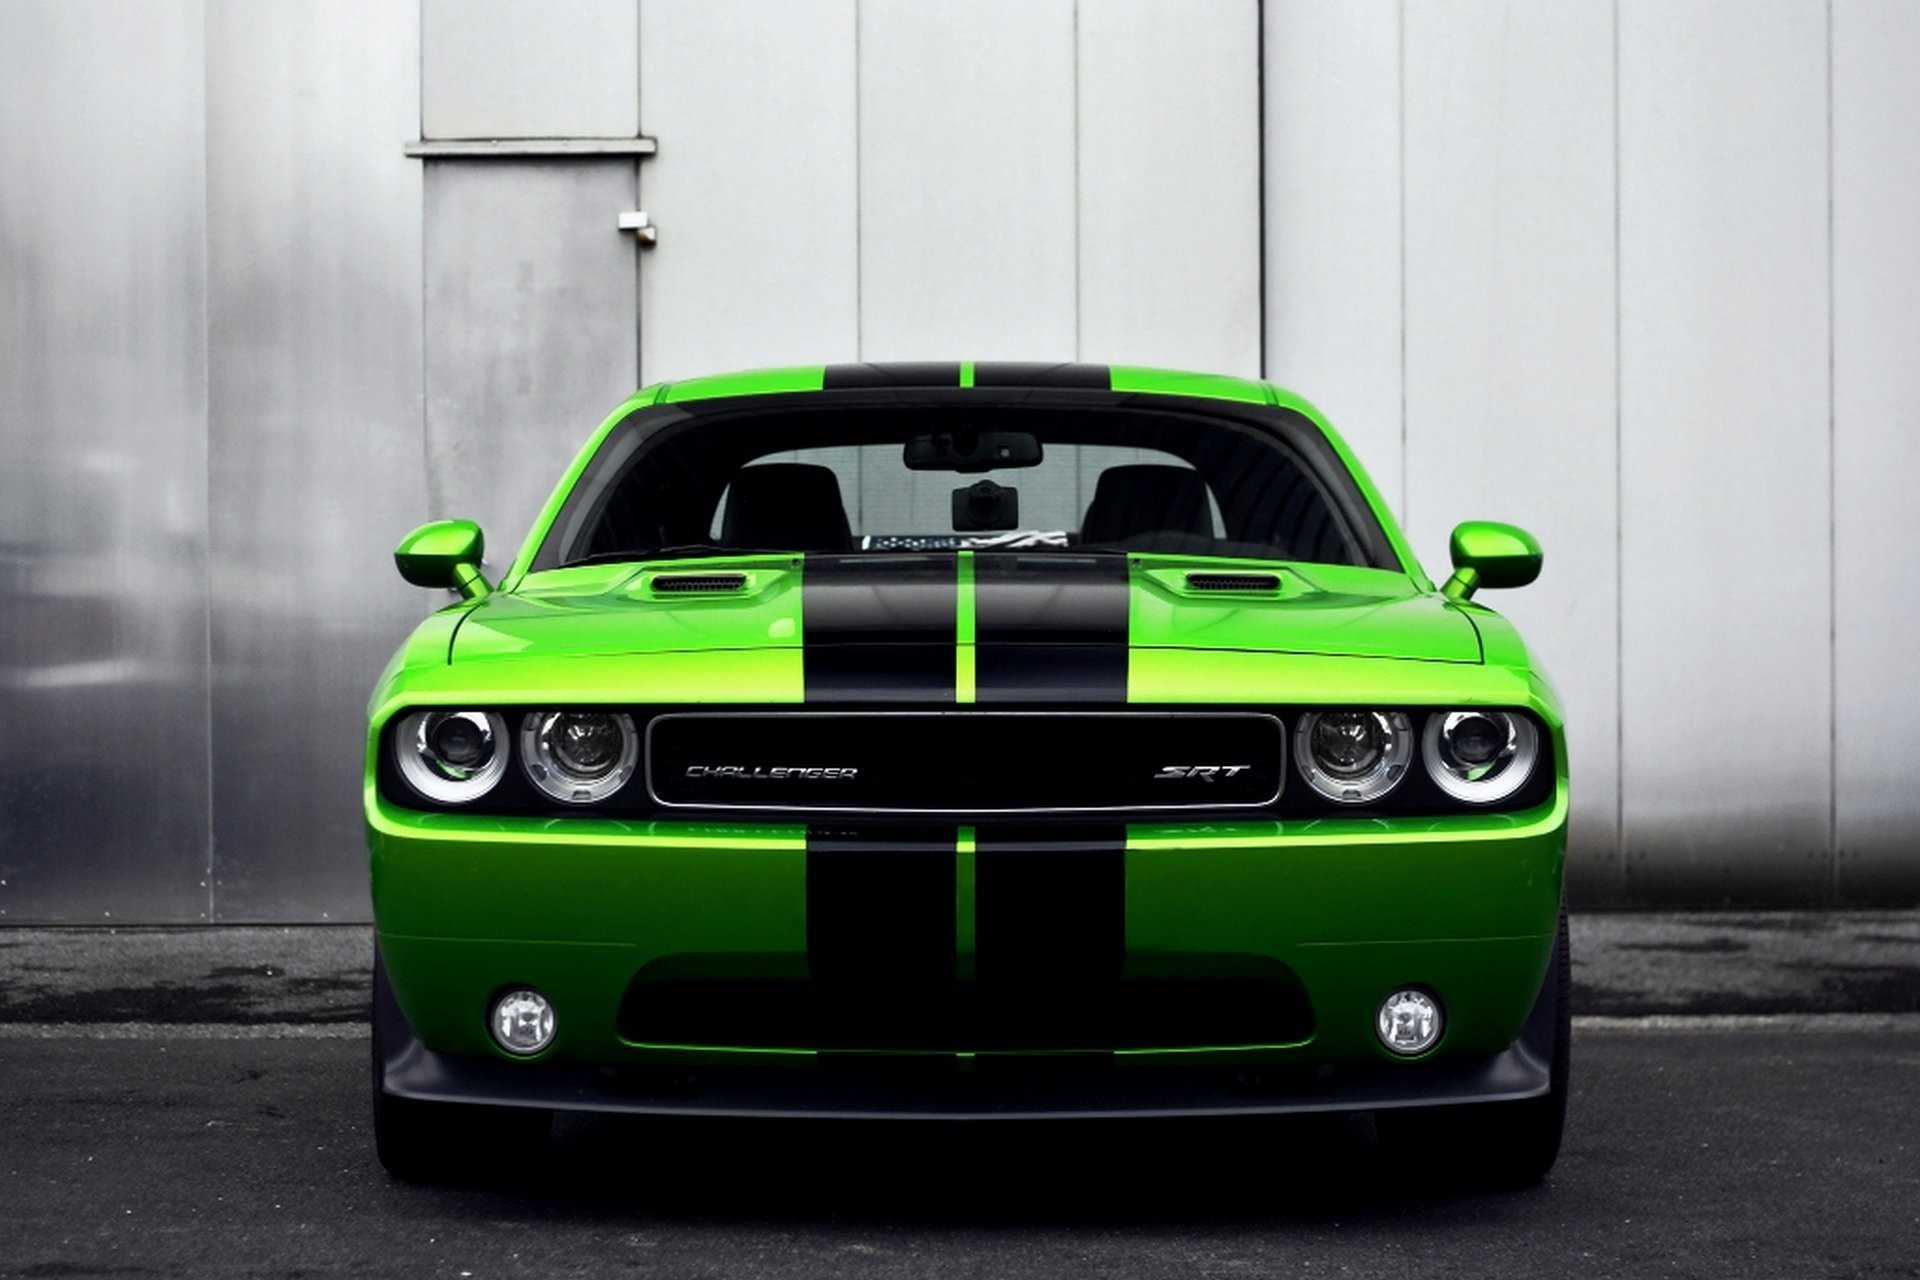 1920x1280 dodge challenger srt8 green car automobile muscle wallpapers hd machine  vehicles dodge challenger green front beautiful